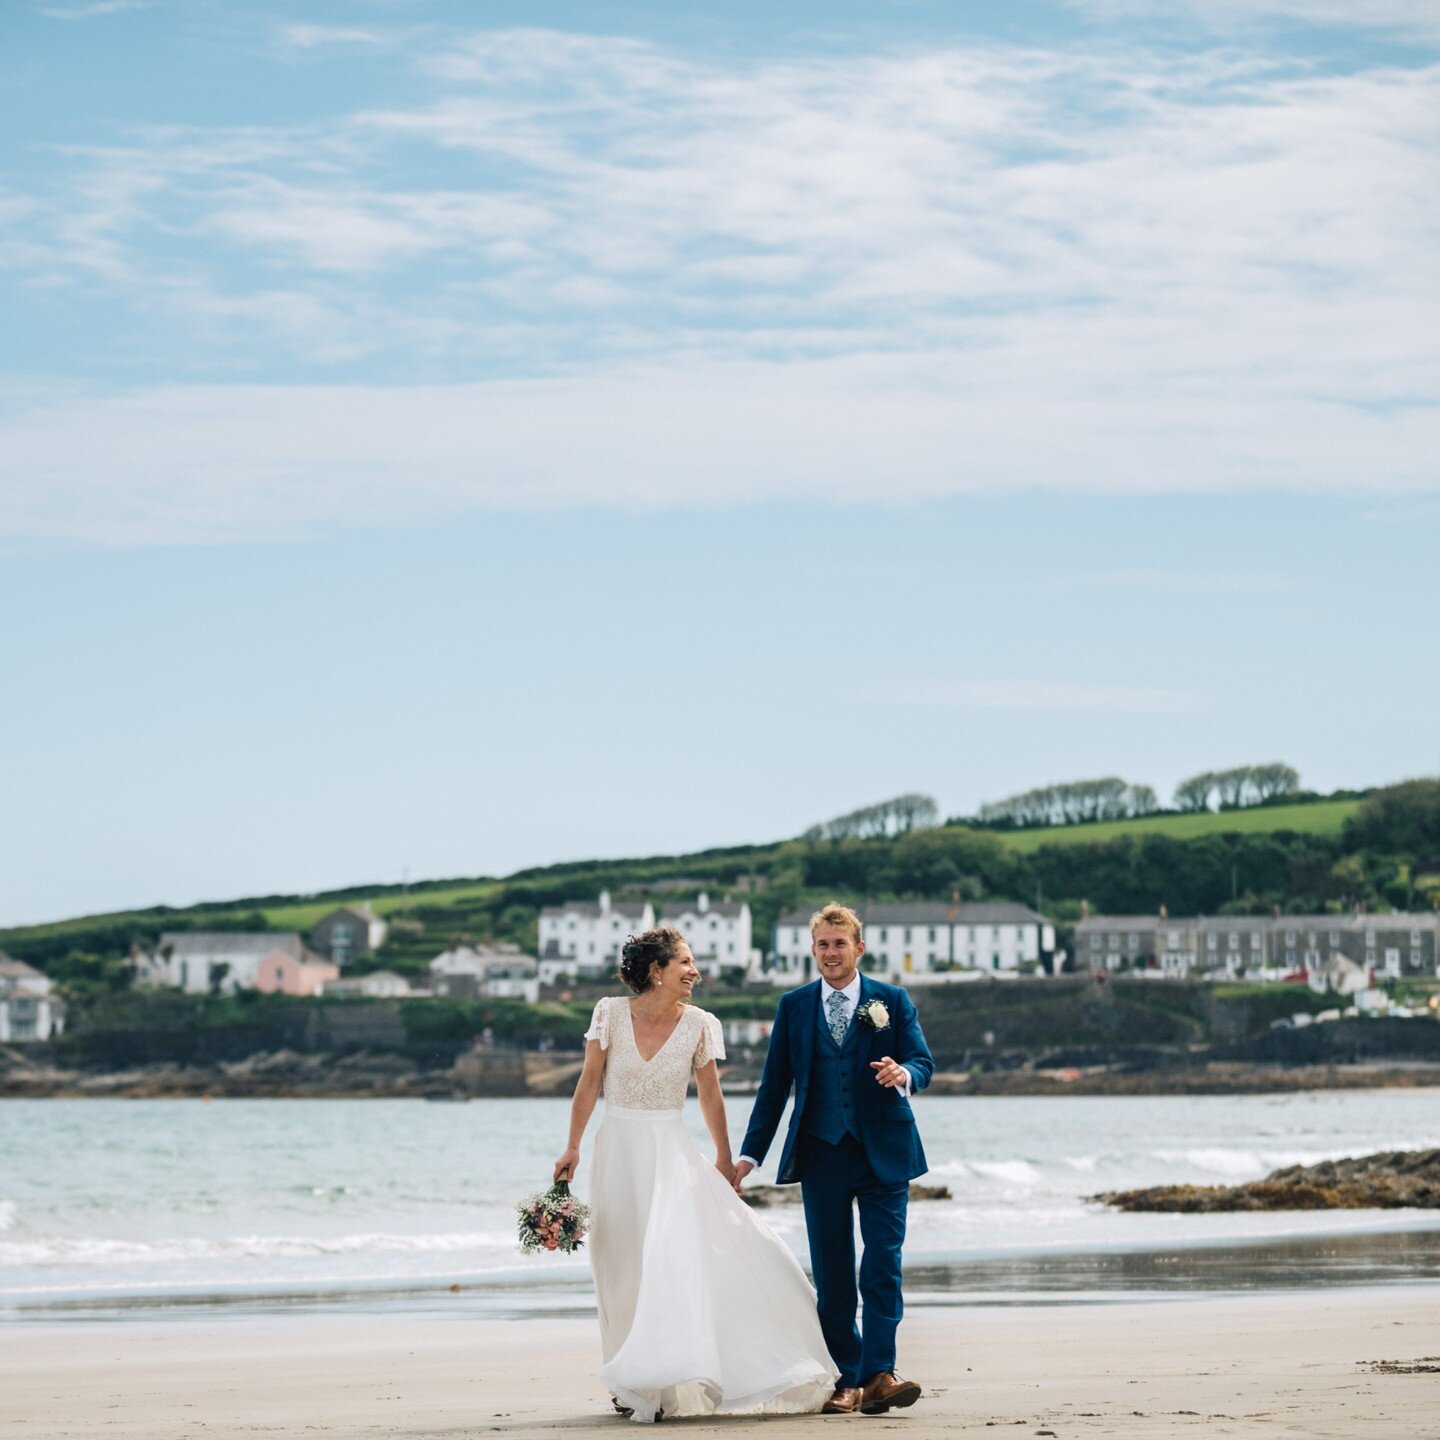 One from S&amp;D's wedding in Porthscatho #cornwallweddingphotographer #cornwallwedding #porthscatho